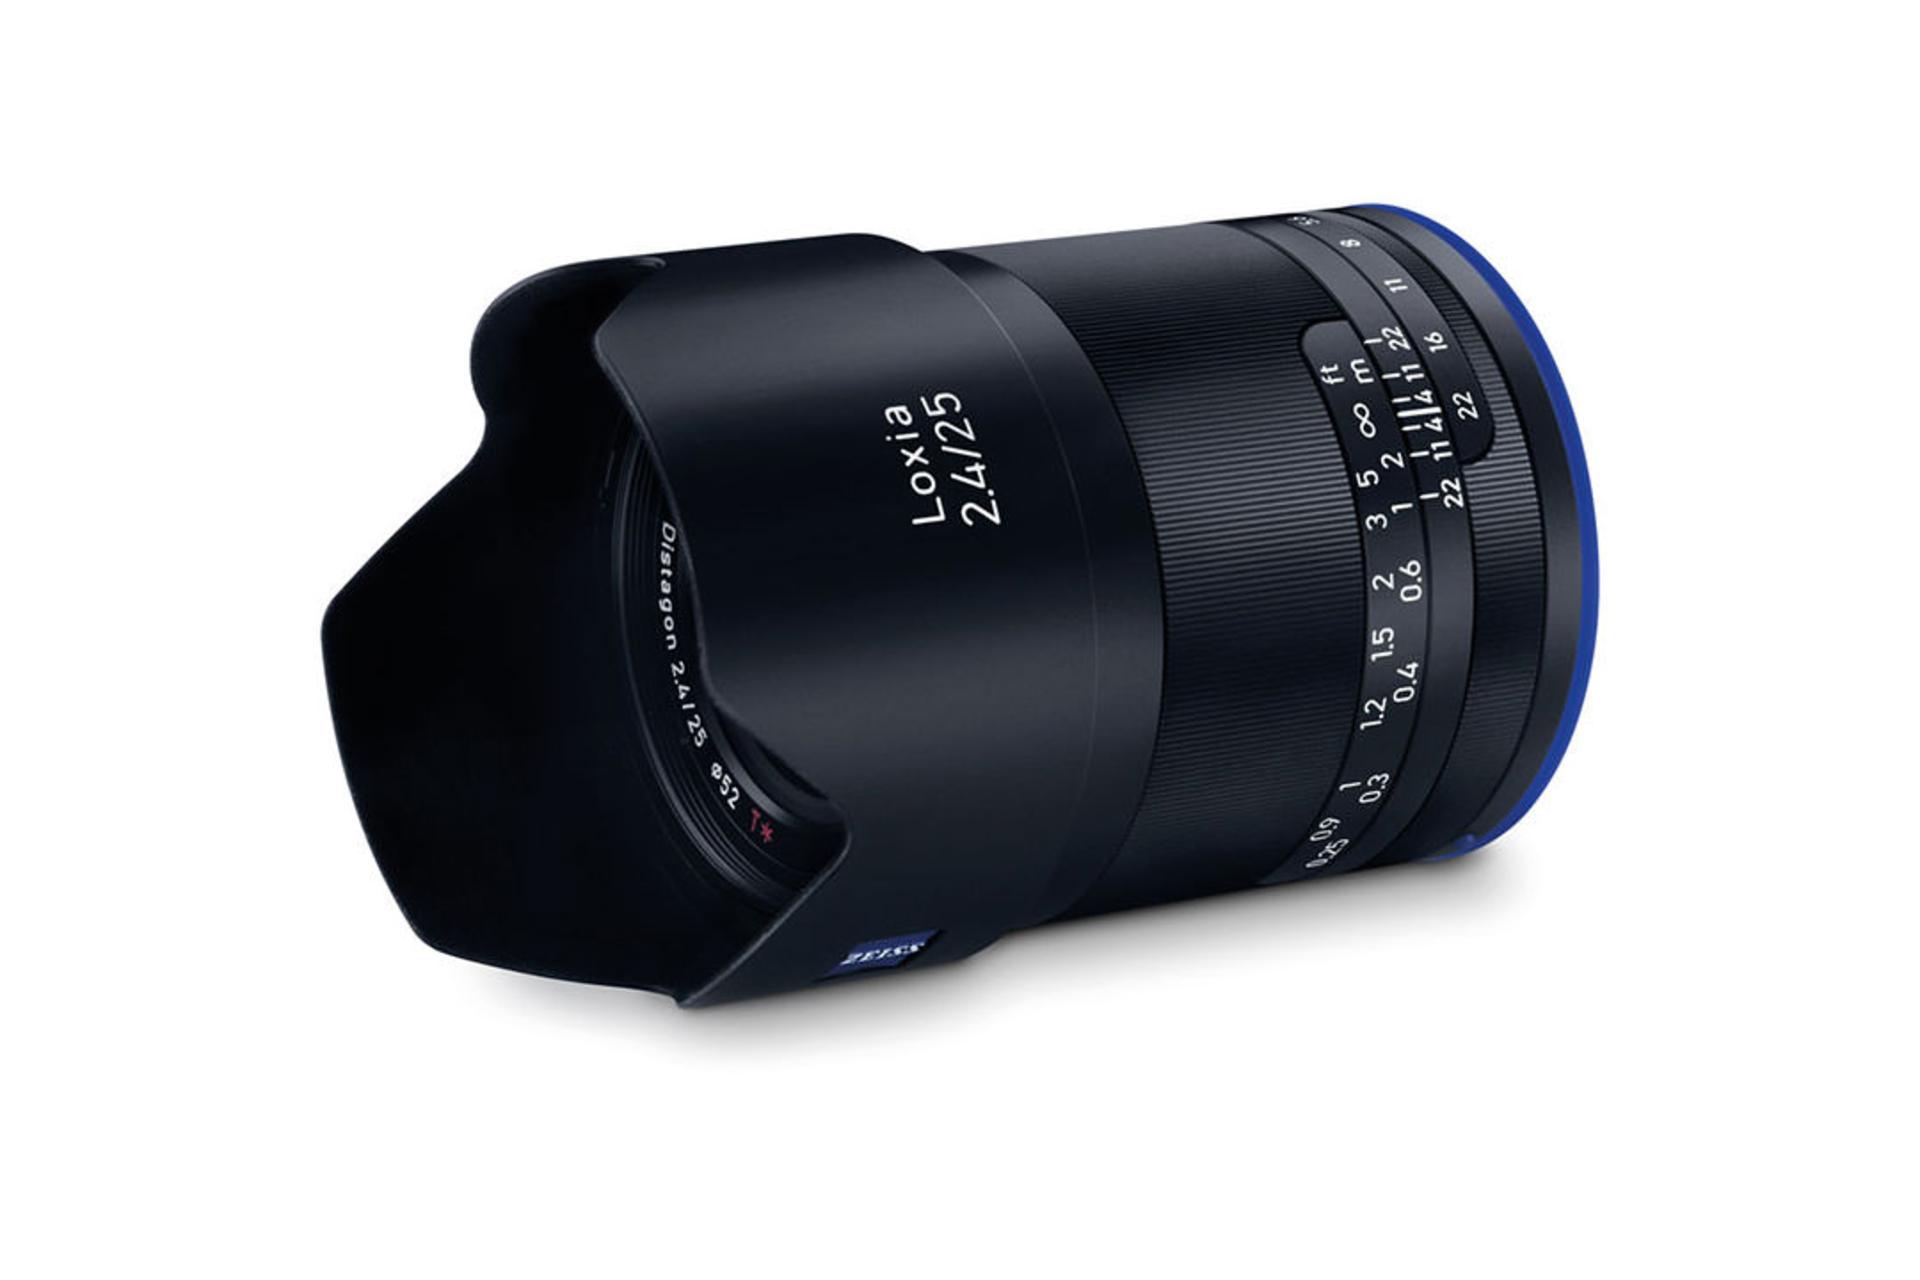 Zeiss Loxia 25mm F2.4